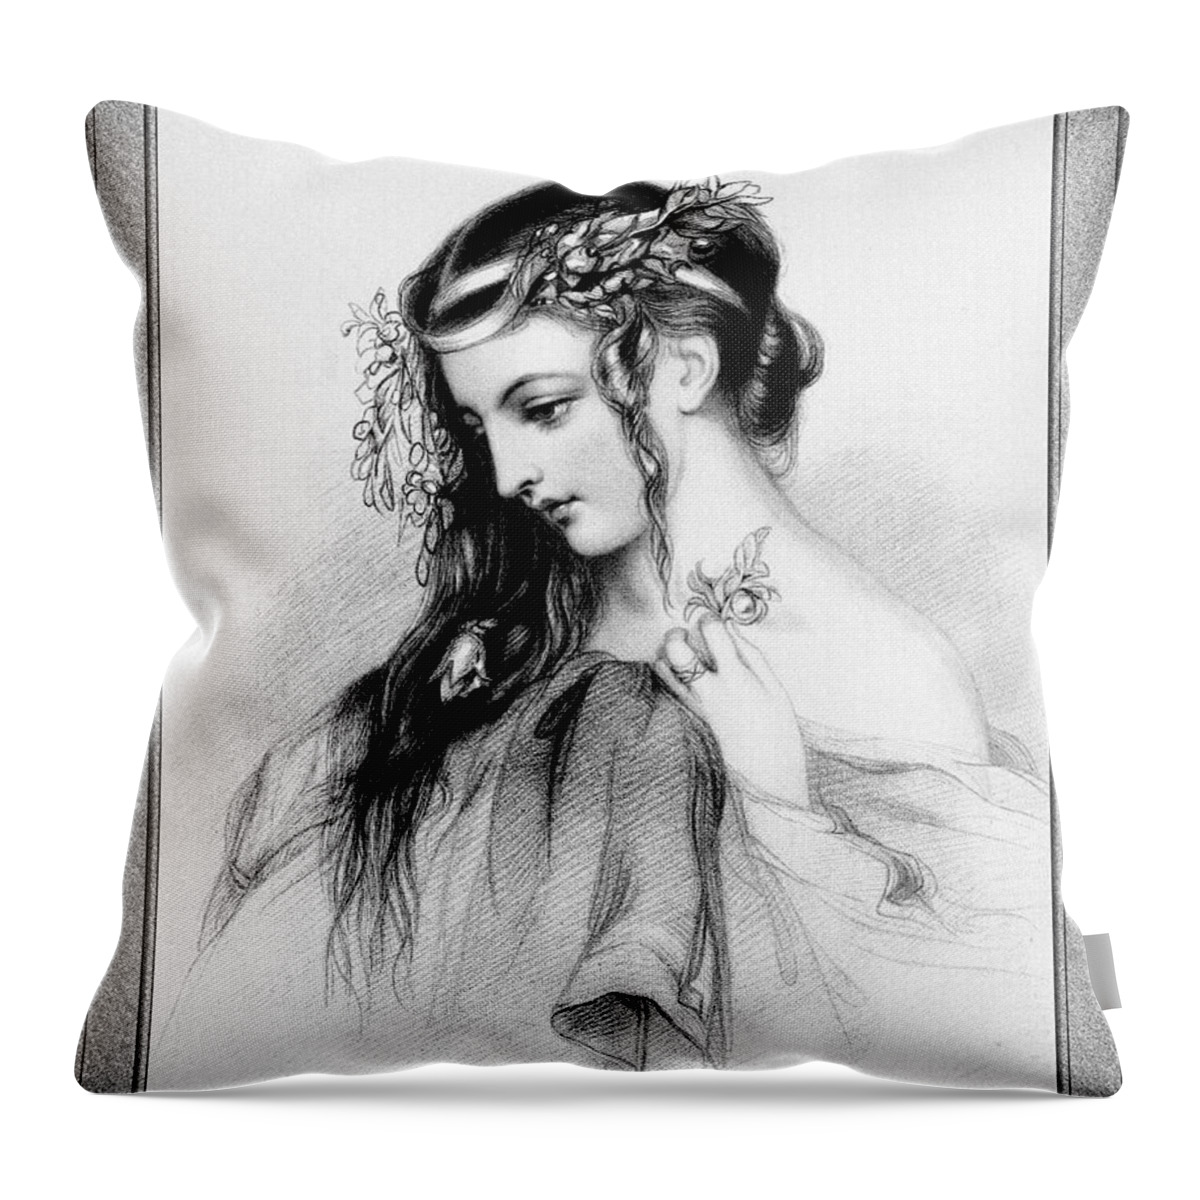 Flower Girl Throw Pillow featuring the drawing The Flower Girl Old Masters Fine Art Illustration by Rolando Burbon